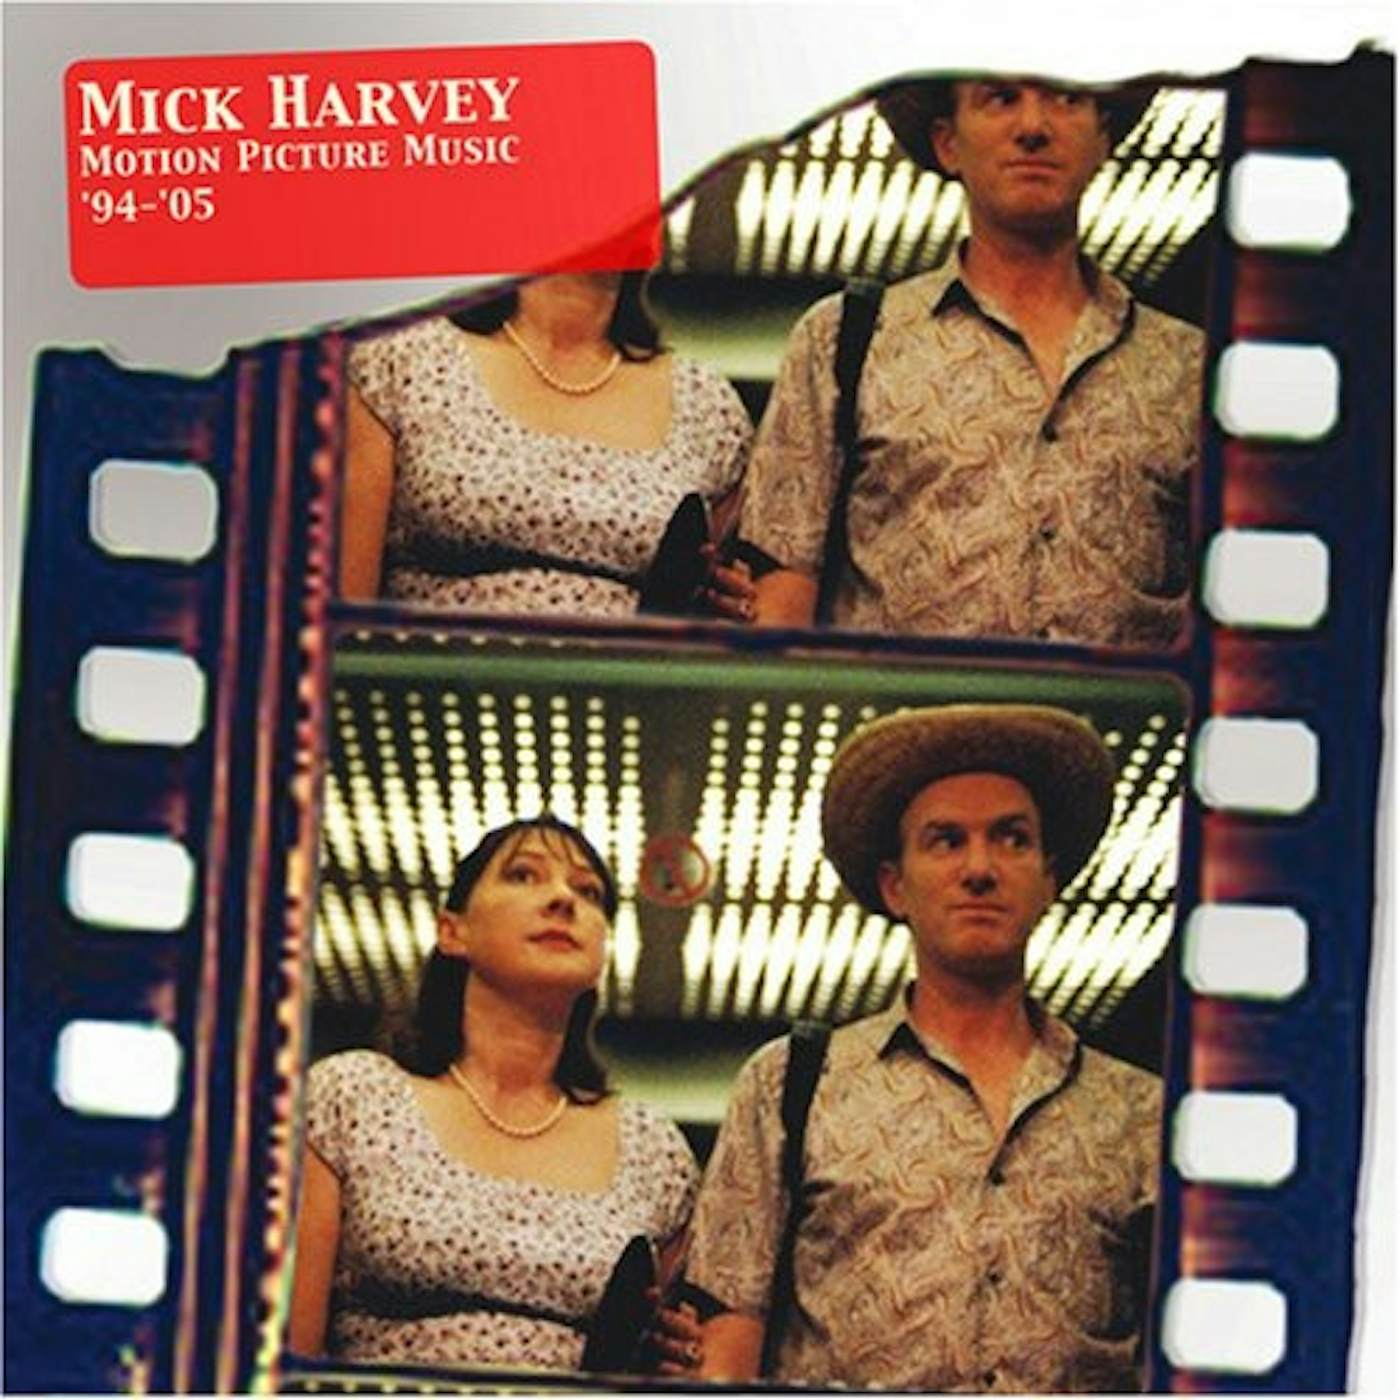 Mick Harvey MOTION PICTURE MUSIC 94-05 CD